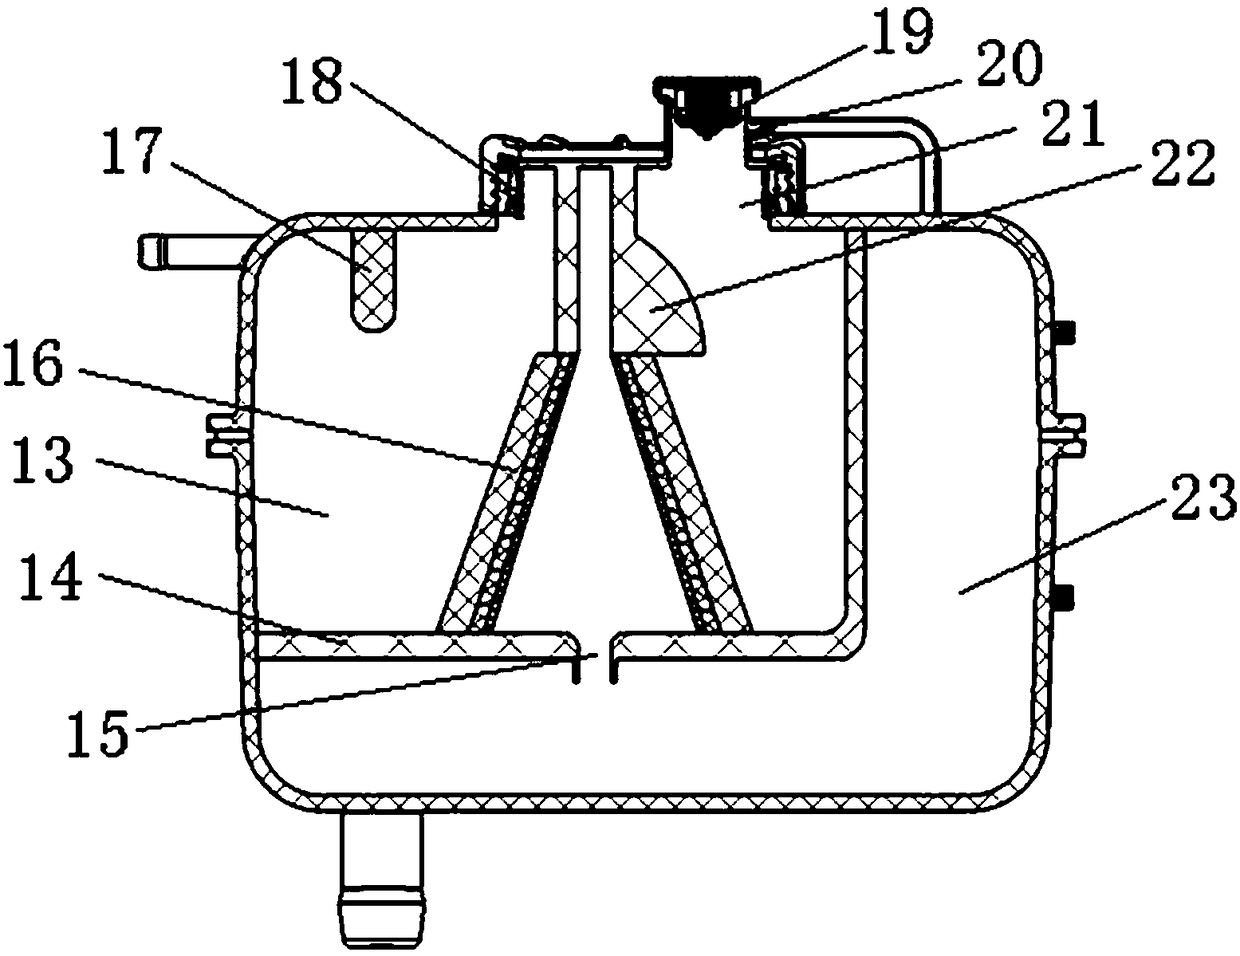 An expansion kettle and its processing method